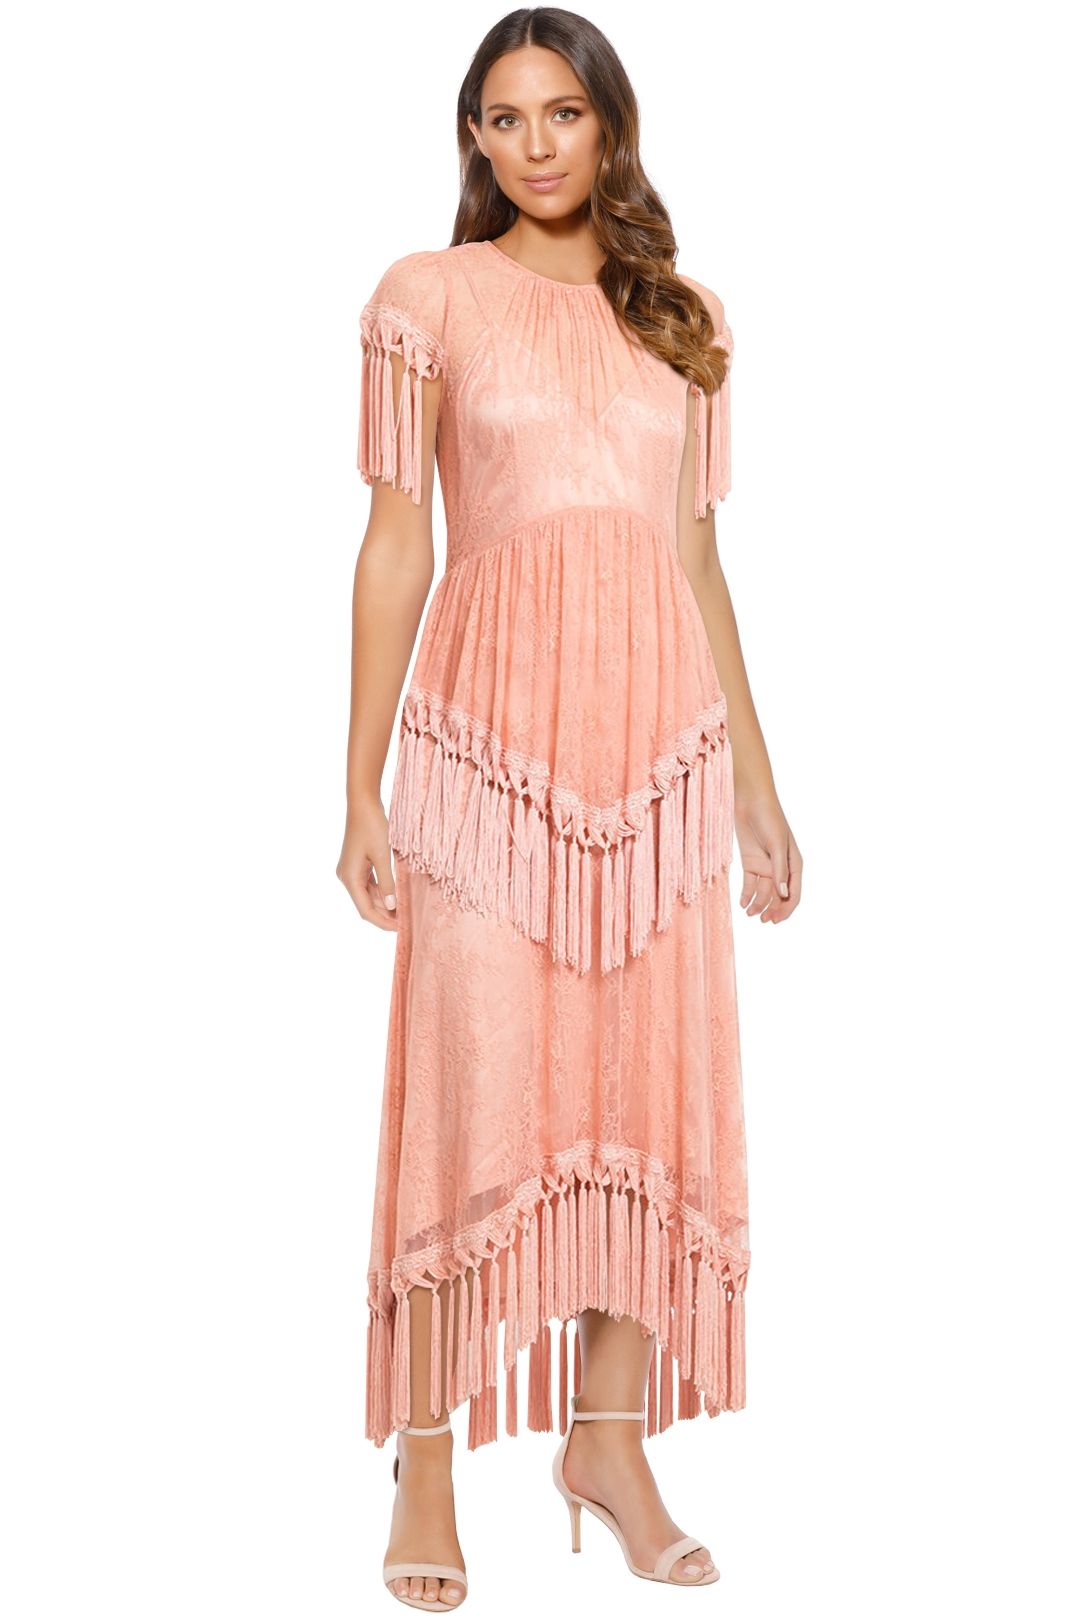 Alice McCall - More Than A Woman Gown - Dusty Rose - Front